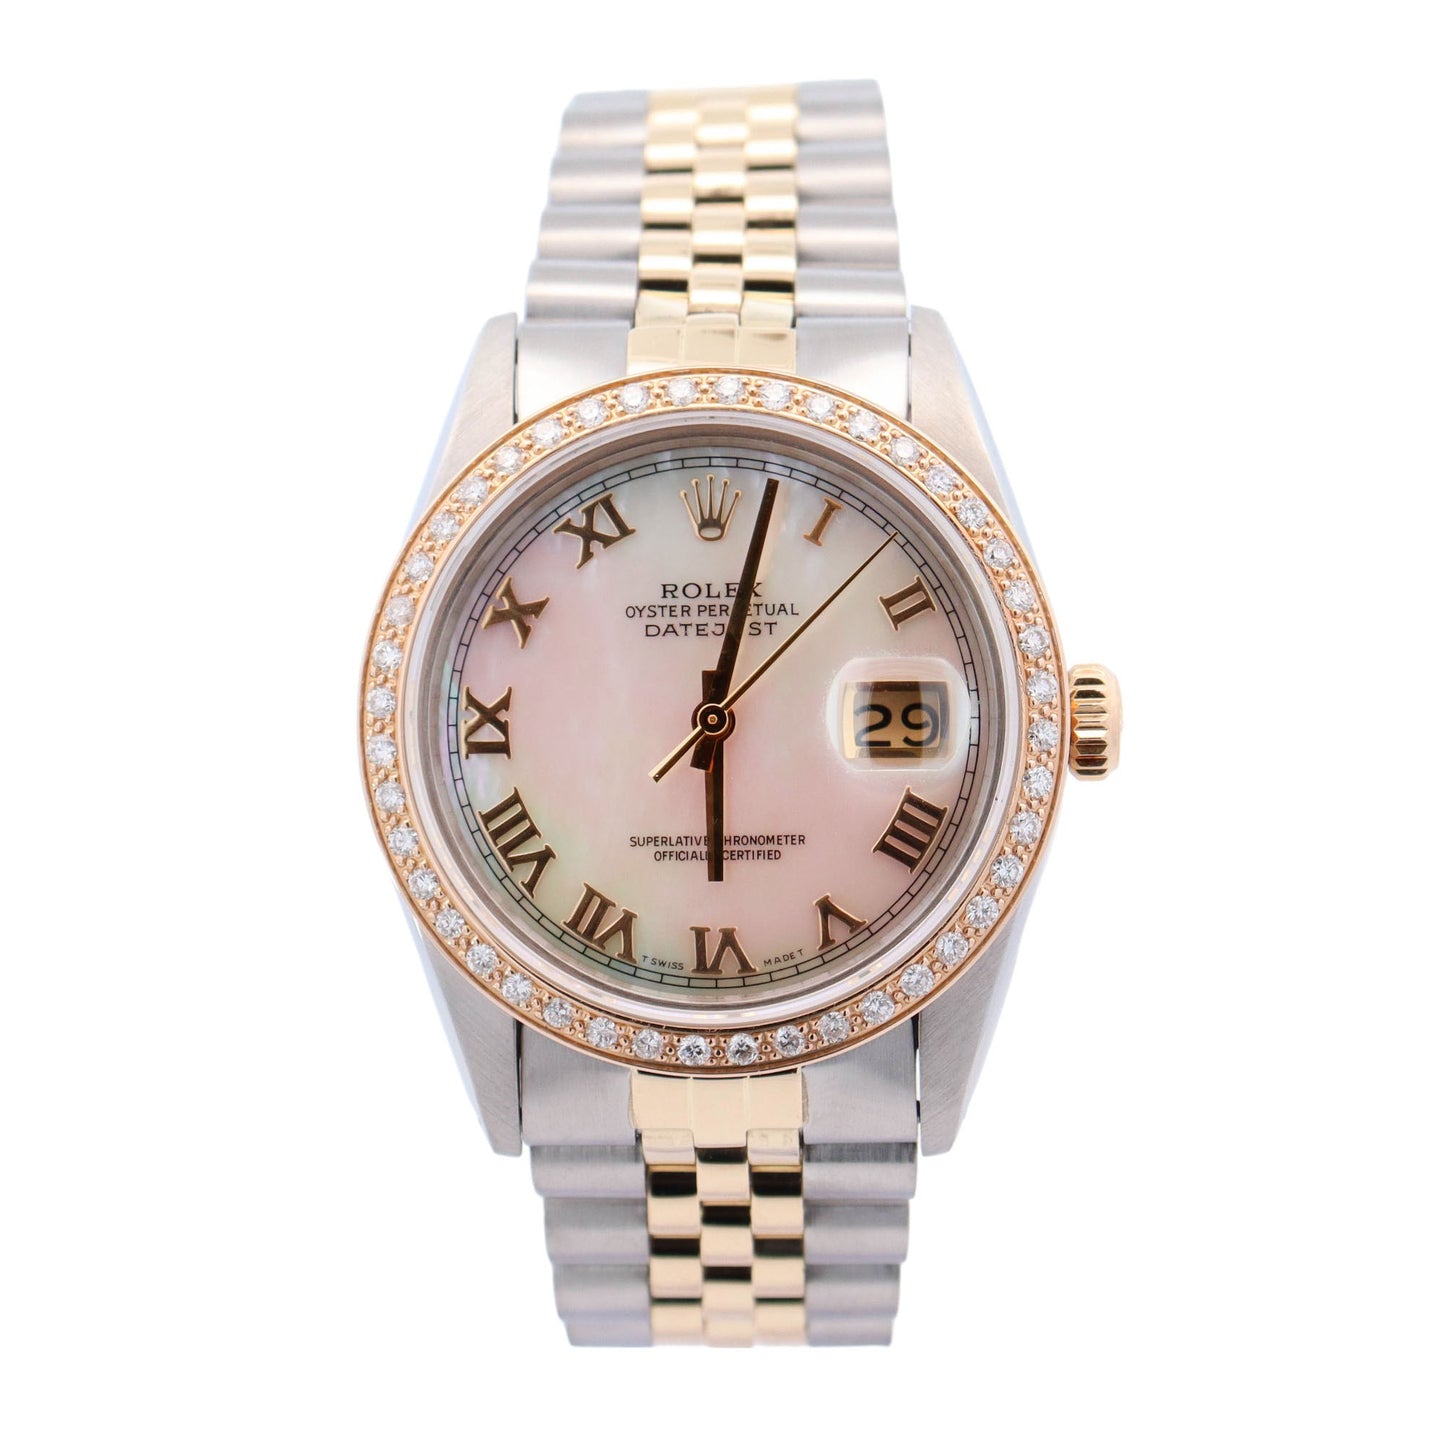 Rolex Datejust Yellow Gold & Stainless Steel Custom White MOP Roman Dial Watch Reference# 16013